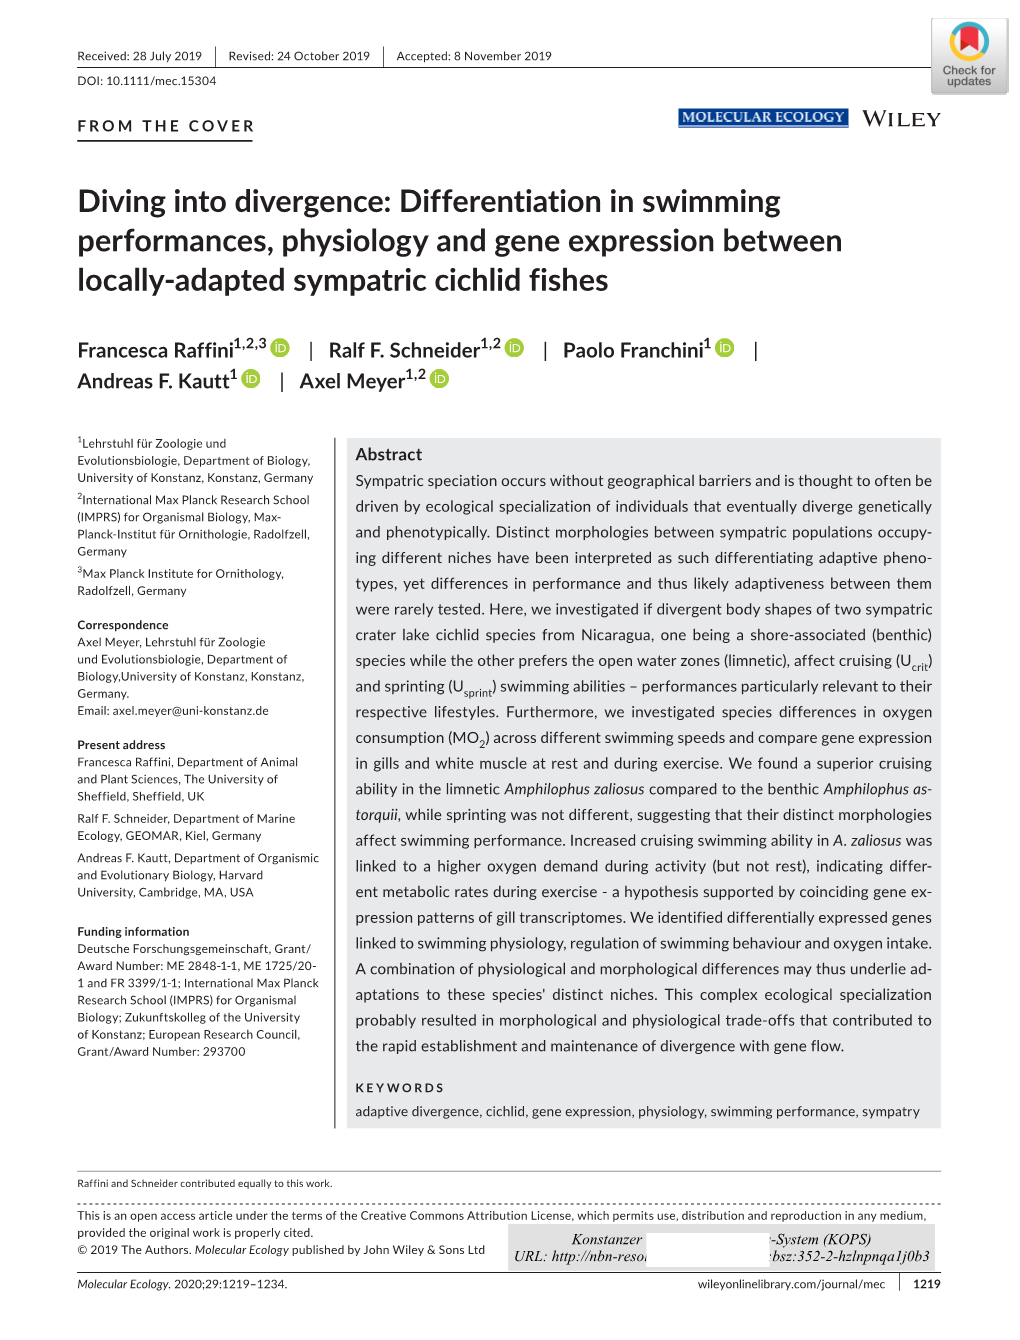 Differentiation in Swimming Performances, Physiology and Gene Expression Between Locally-Adapted Sympatric Cichlid Fishes